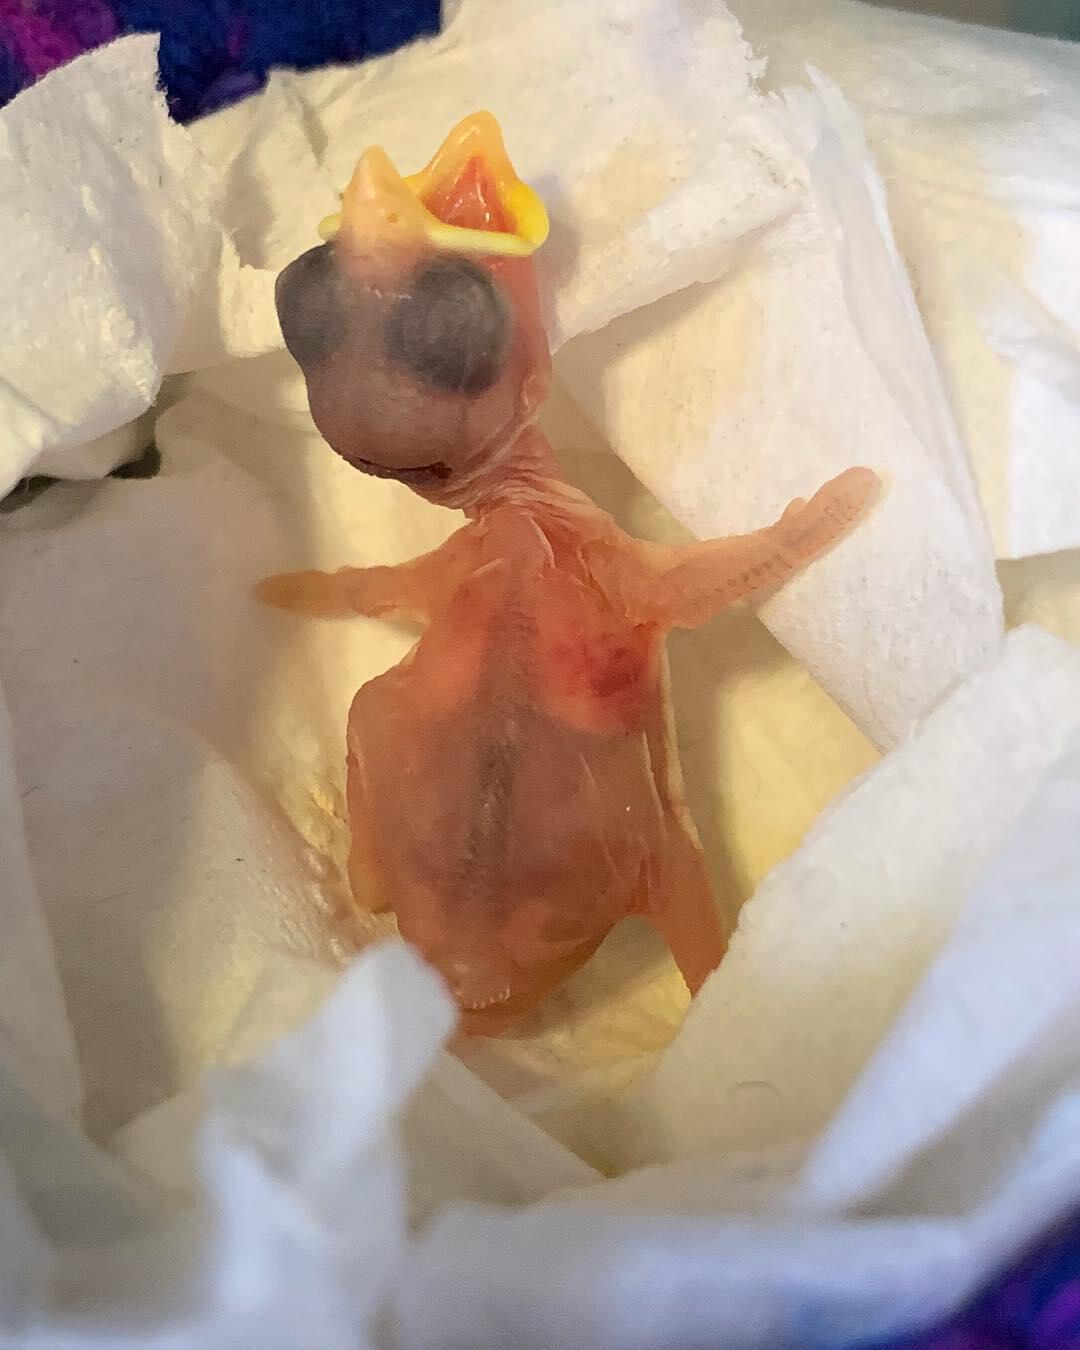 A tiny, pink featherless House Sparrow hatchling on a white napkin, beak open as it calls for food.